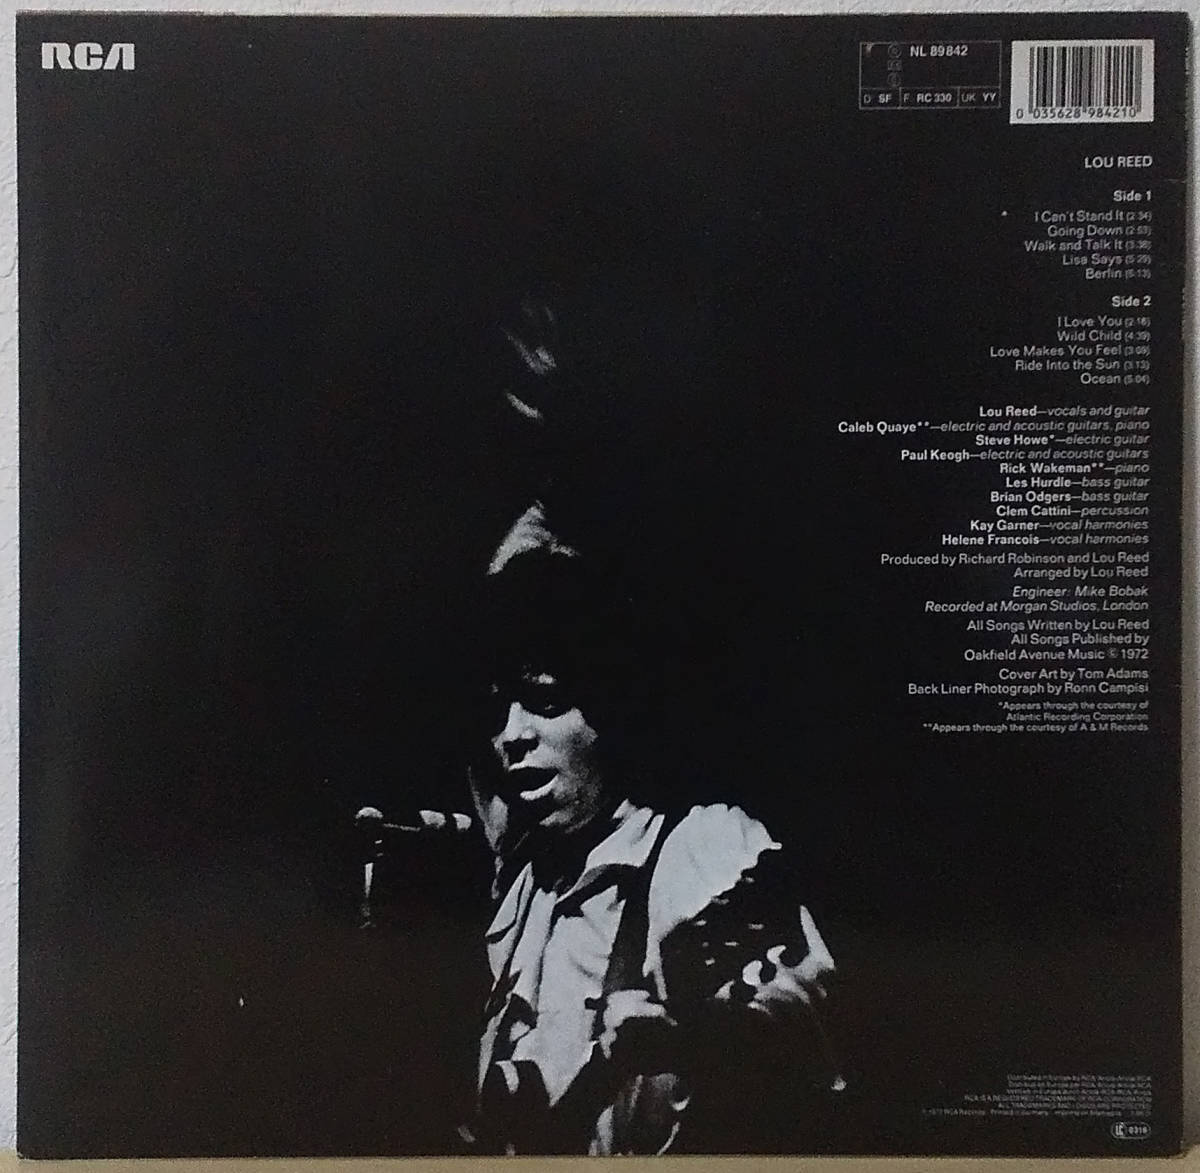 Lou Reed - Lou Reed UK & EU盤 LP, RCA - NL 89842 ルー・リード 1986年 DAVID BOWIE_画像2